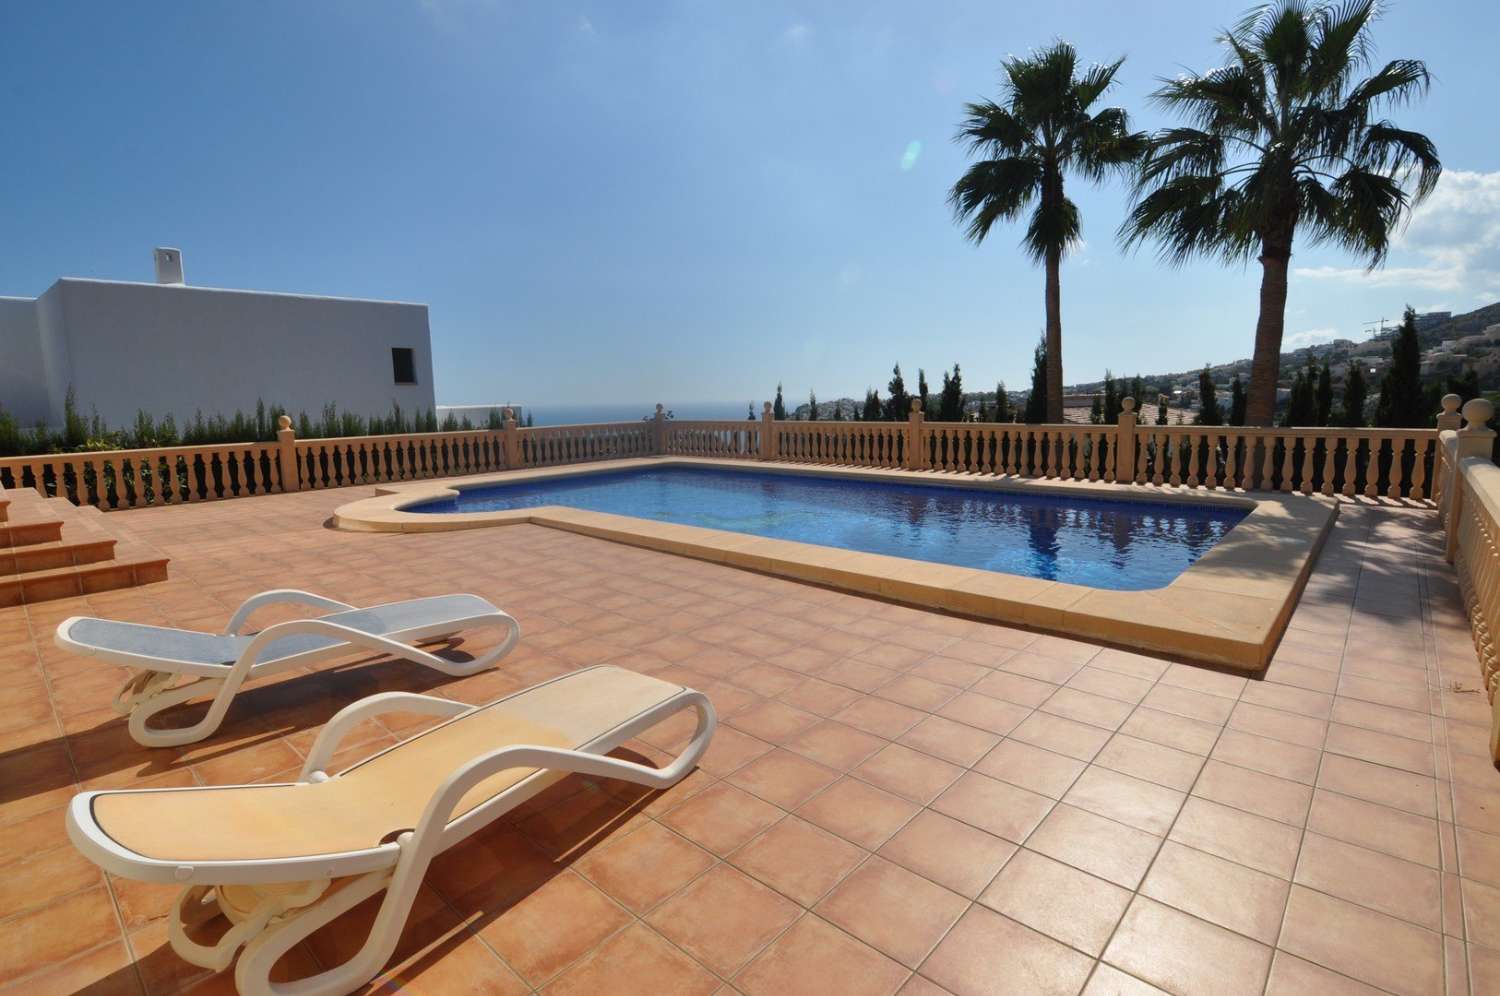 TAILOR MADE LUXURY VILLA WITH PANORAMIC VIEWS FOR SALE CUMBRE DEL SOL, BENITACHELL